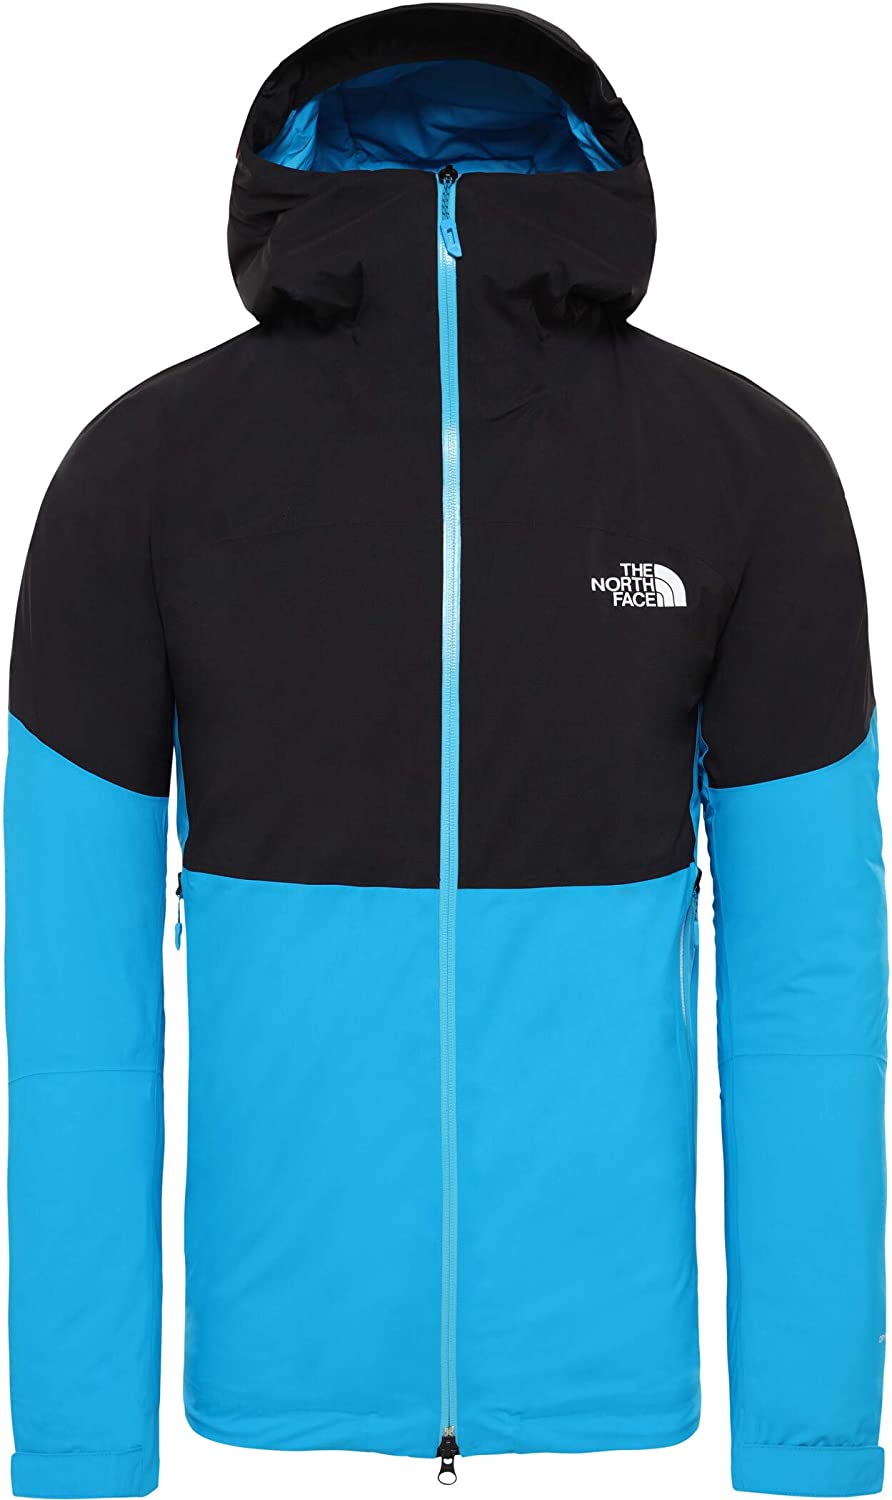 The North Face Impendor Insulated Waterproof Jacket, Acoustic Blue